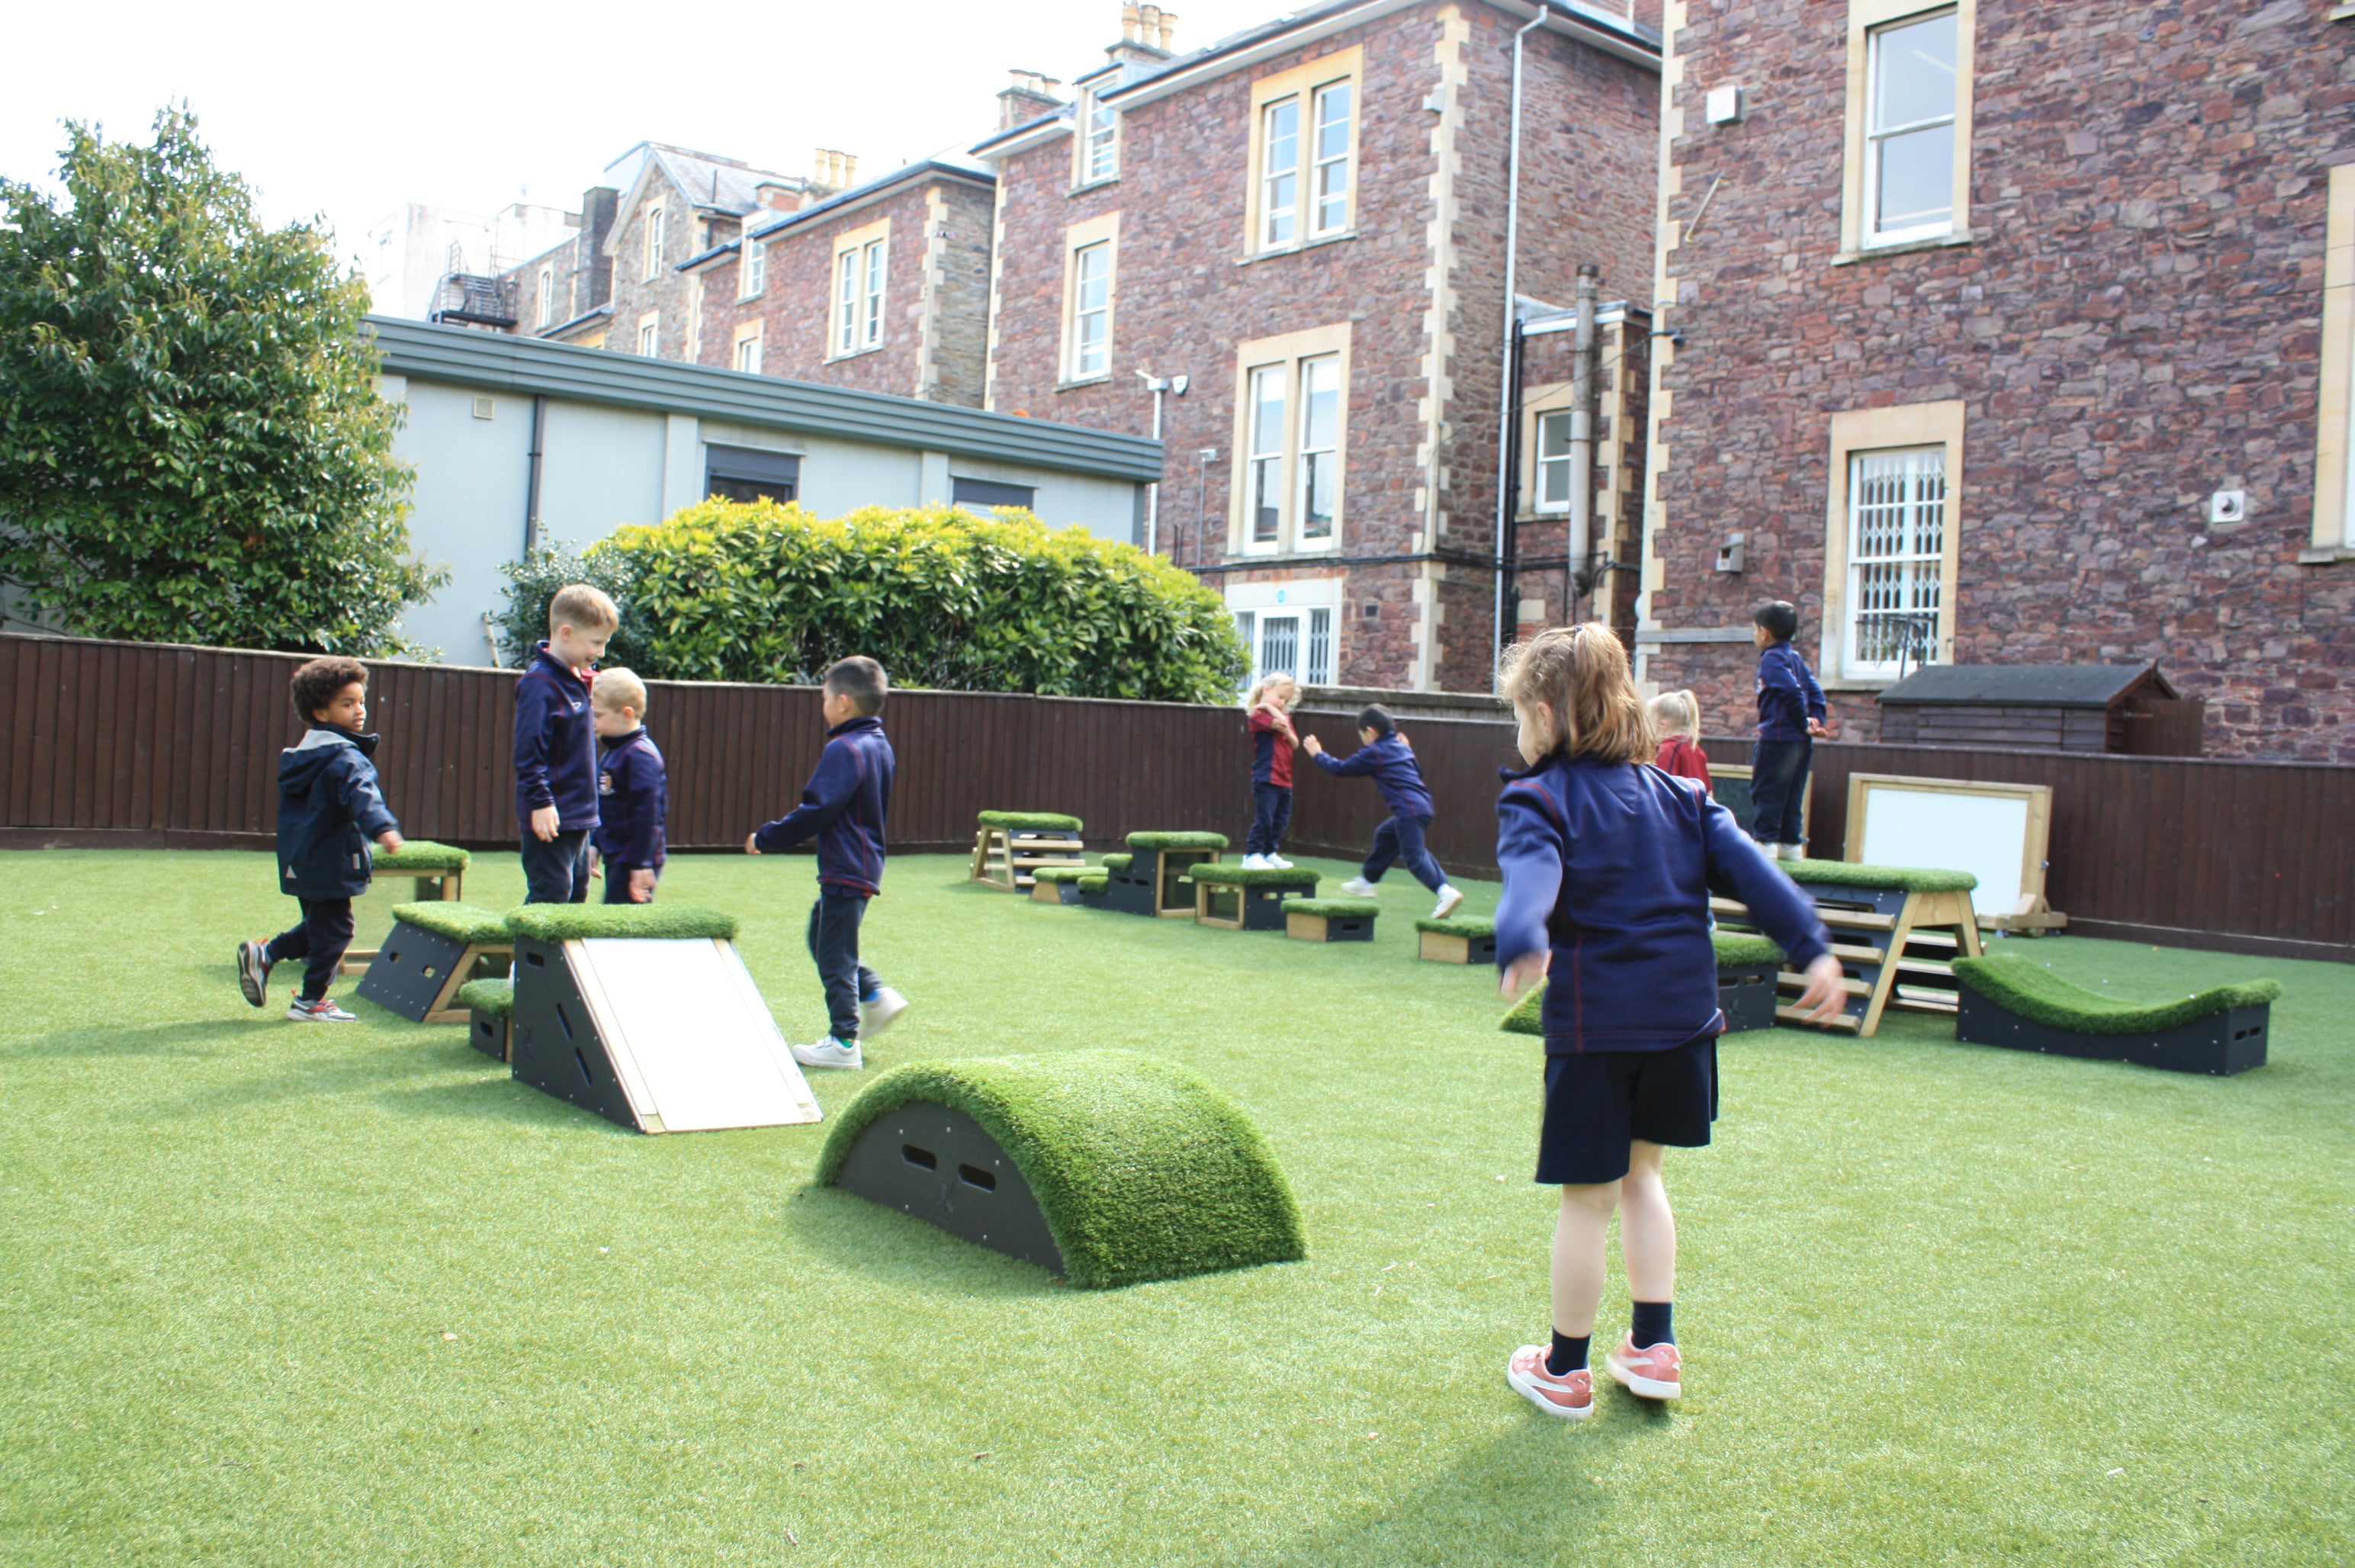 A group of children are playing on the Get Set, Go! Blocks. These blocks have wooden sides with an Artificial Grass top and have been set up in 2 straight lines. The children are in two separate groups as they play on them.